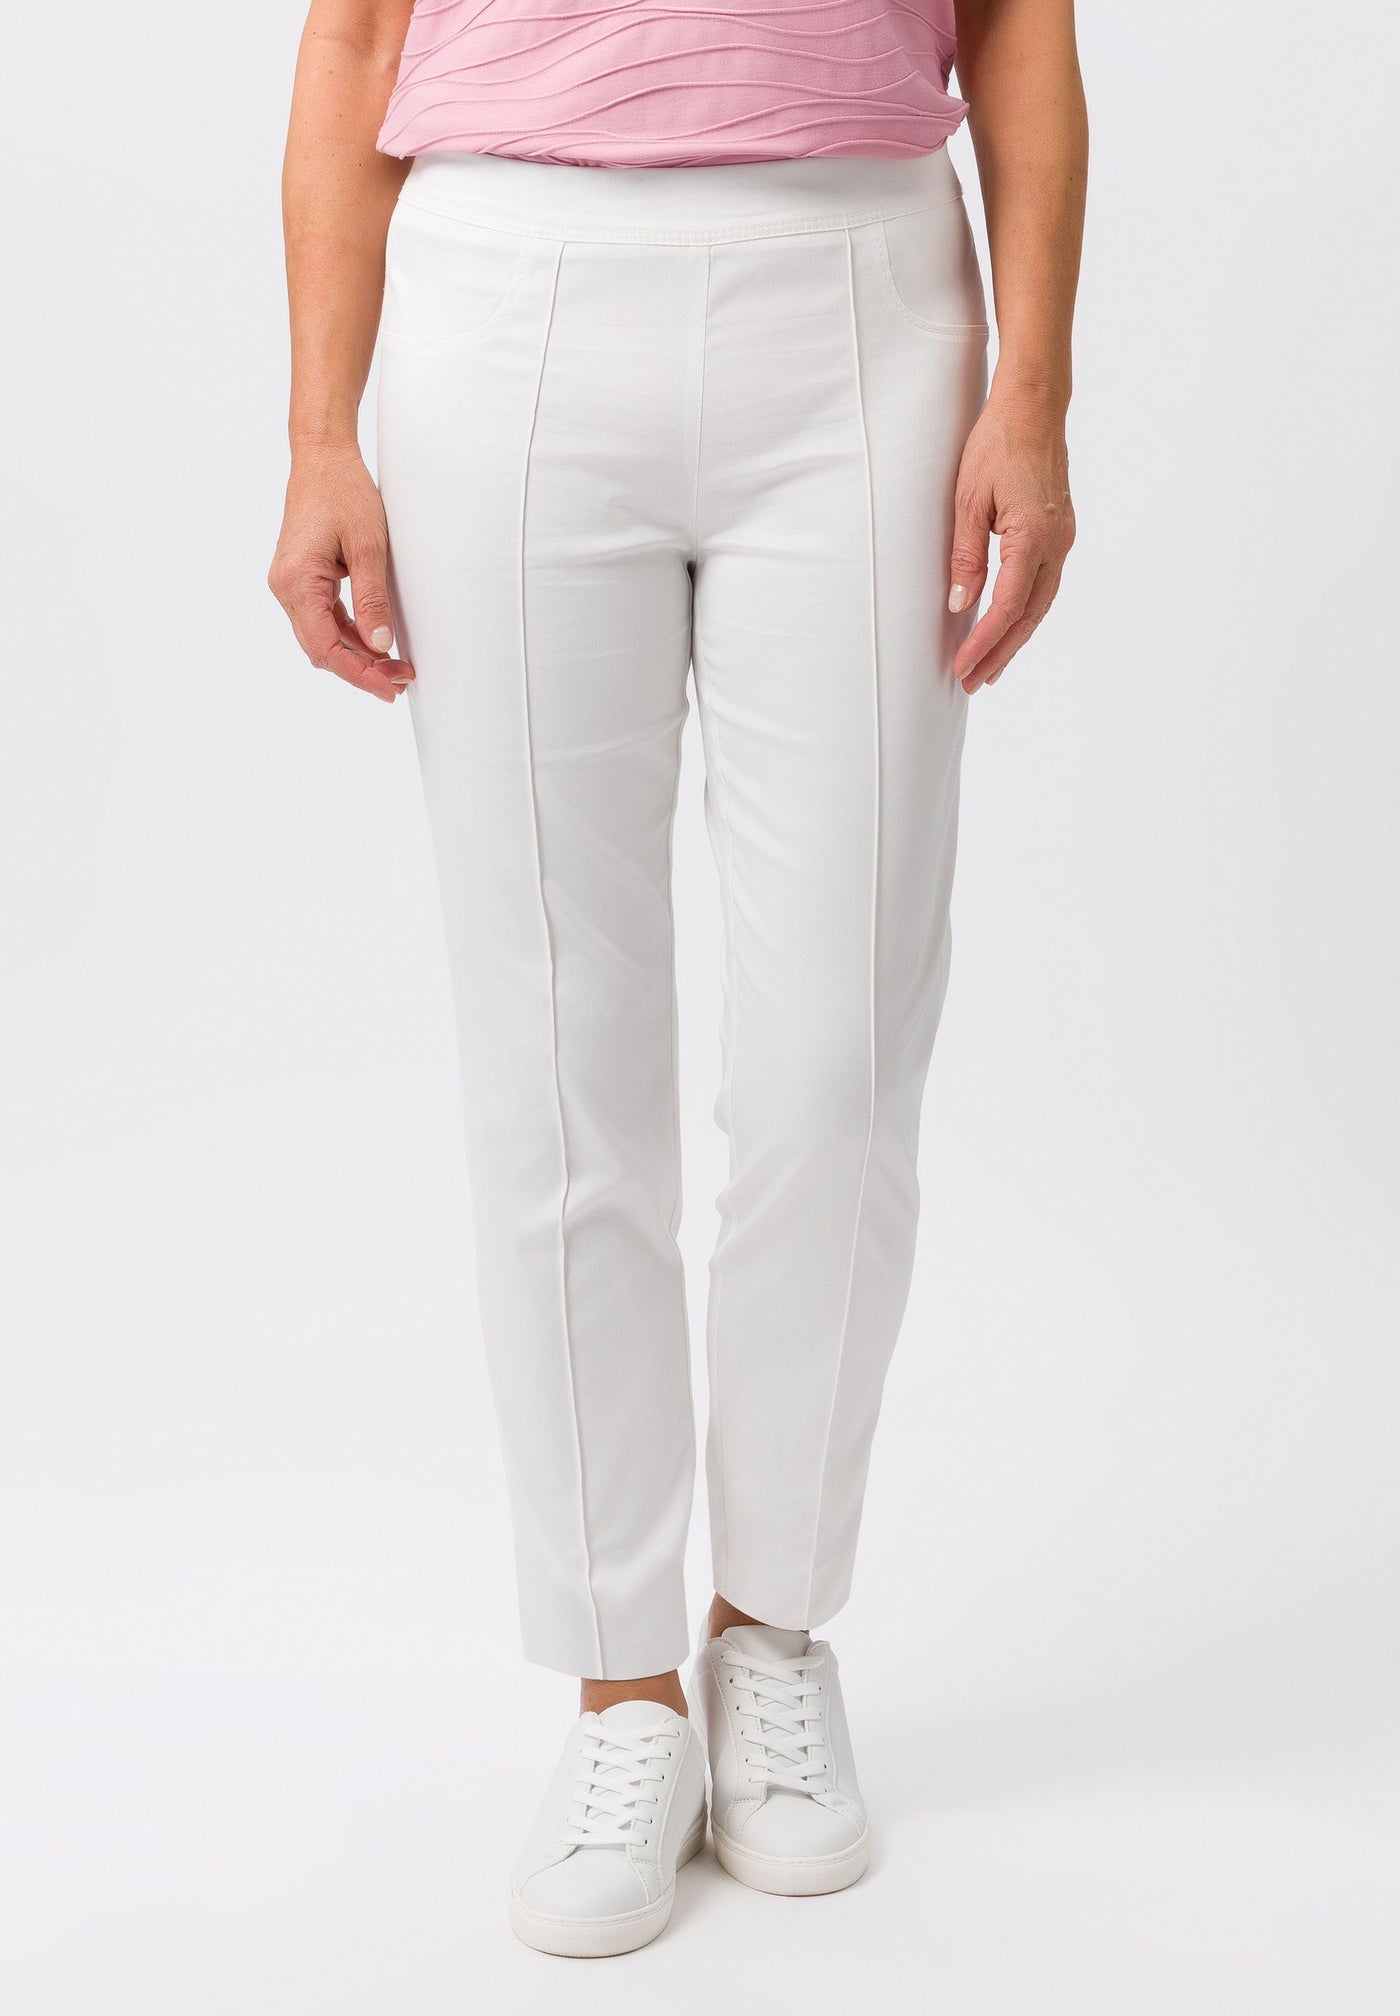 Off-White Trousers with Front Seam